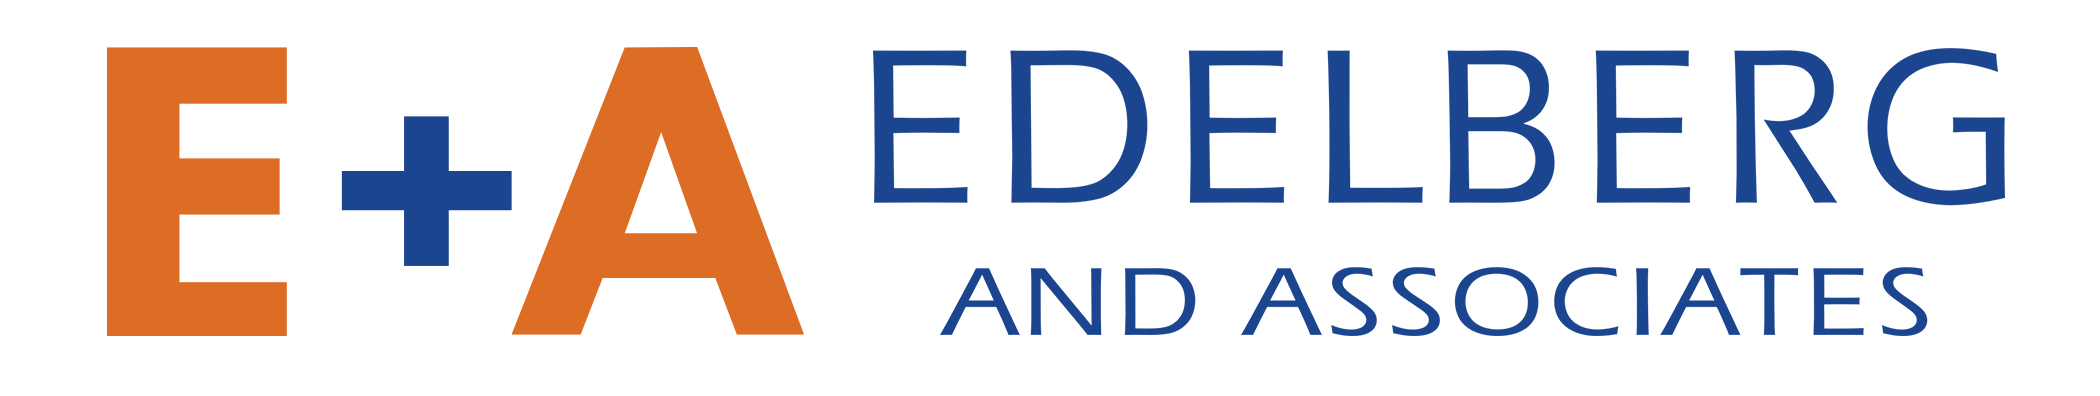 Edelberg Logo, E + A in orange text, with Edelberg and Associates written on the right side.